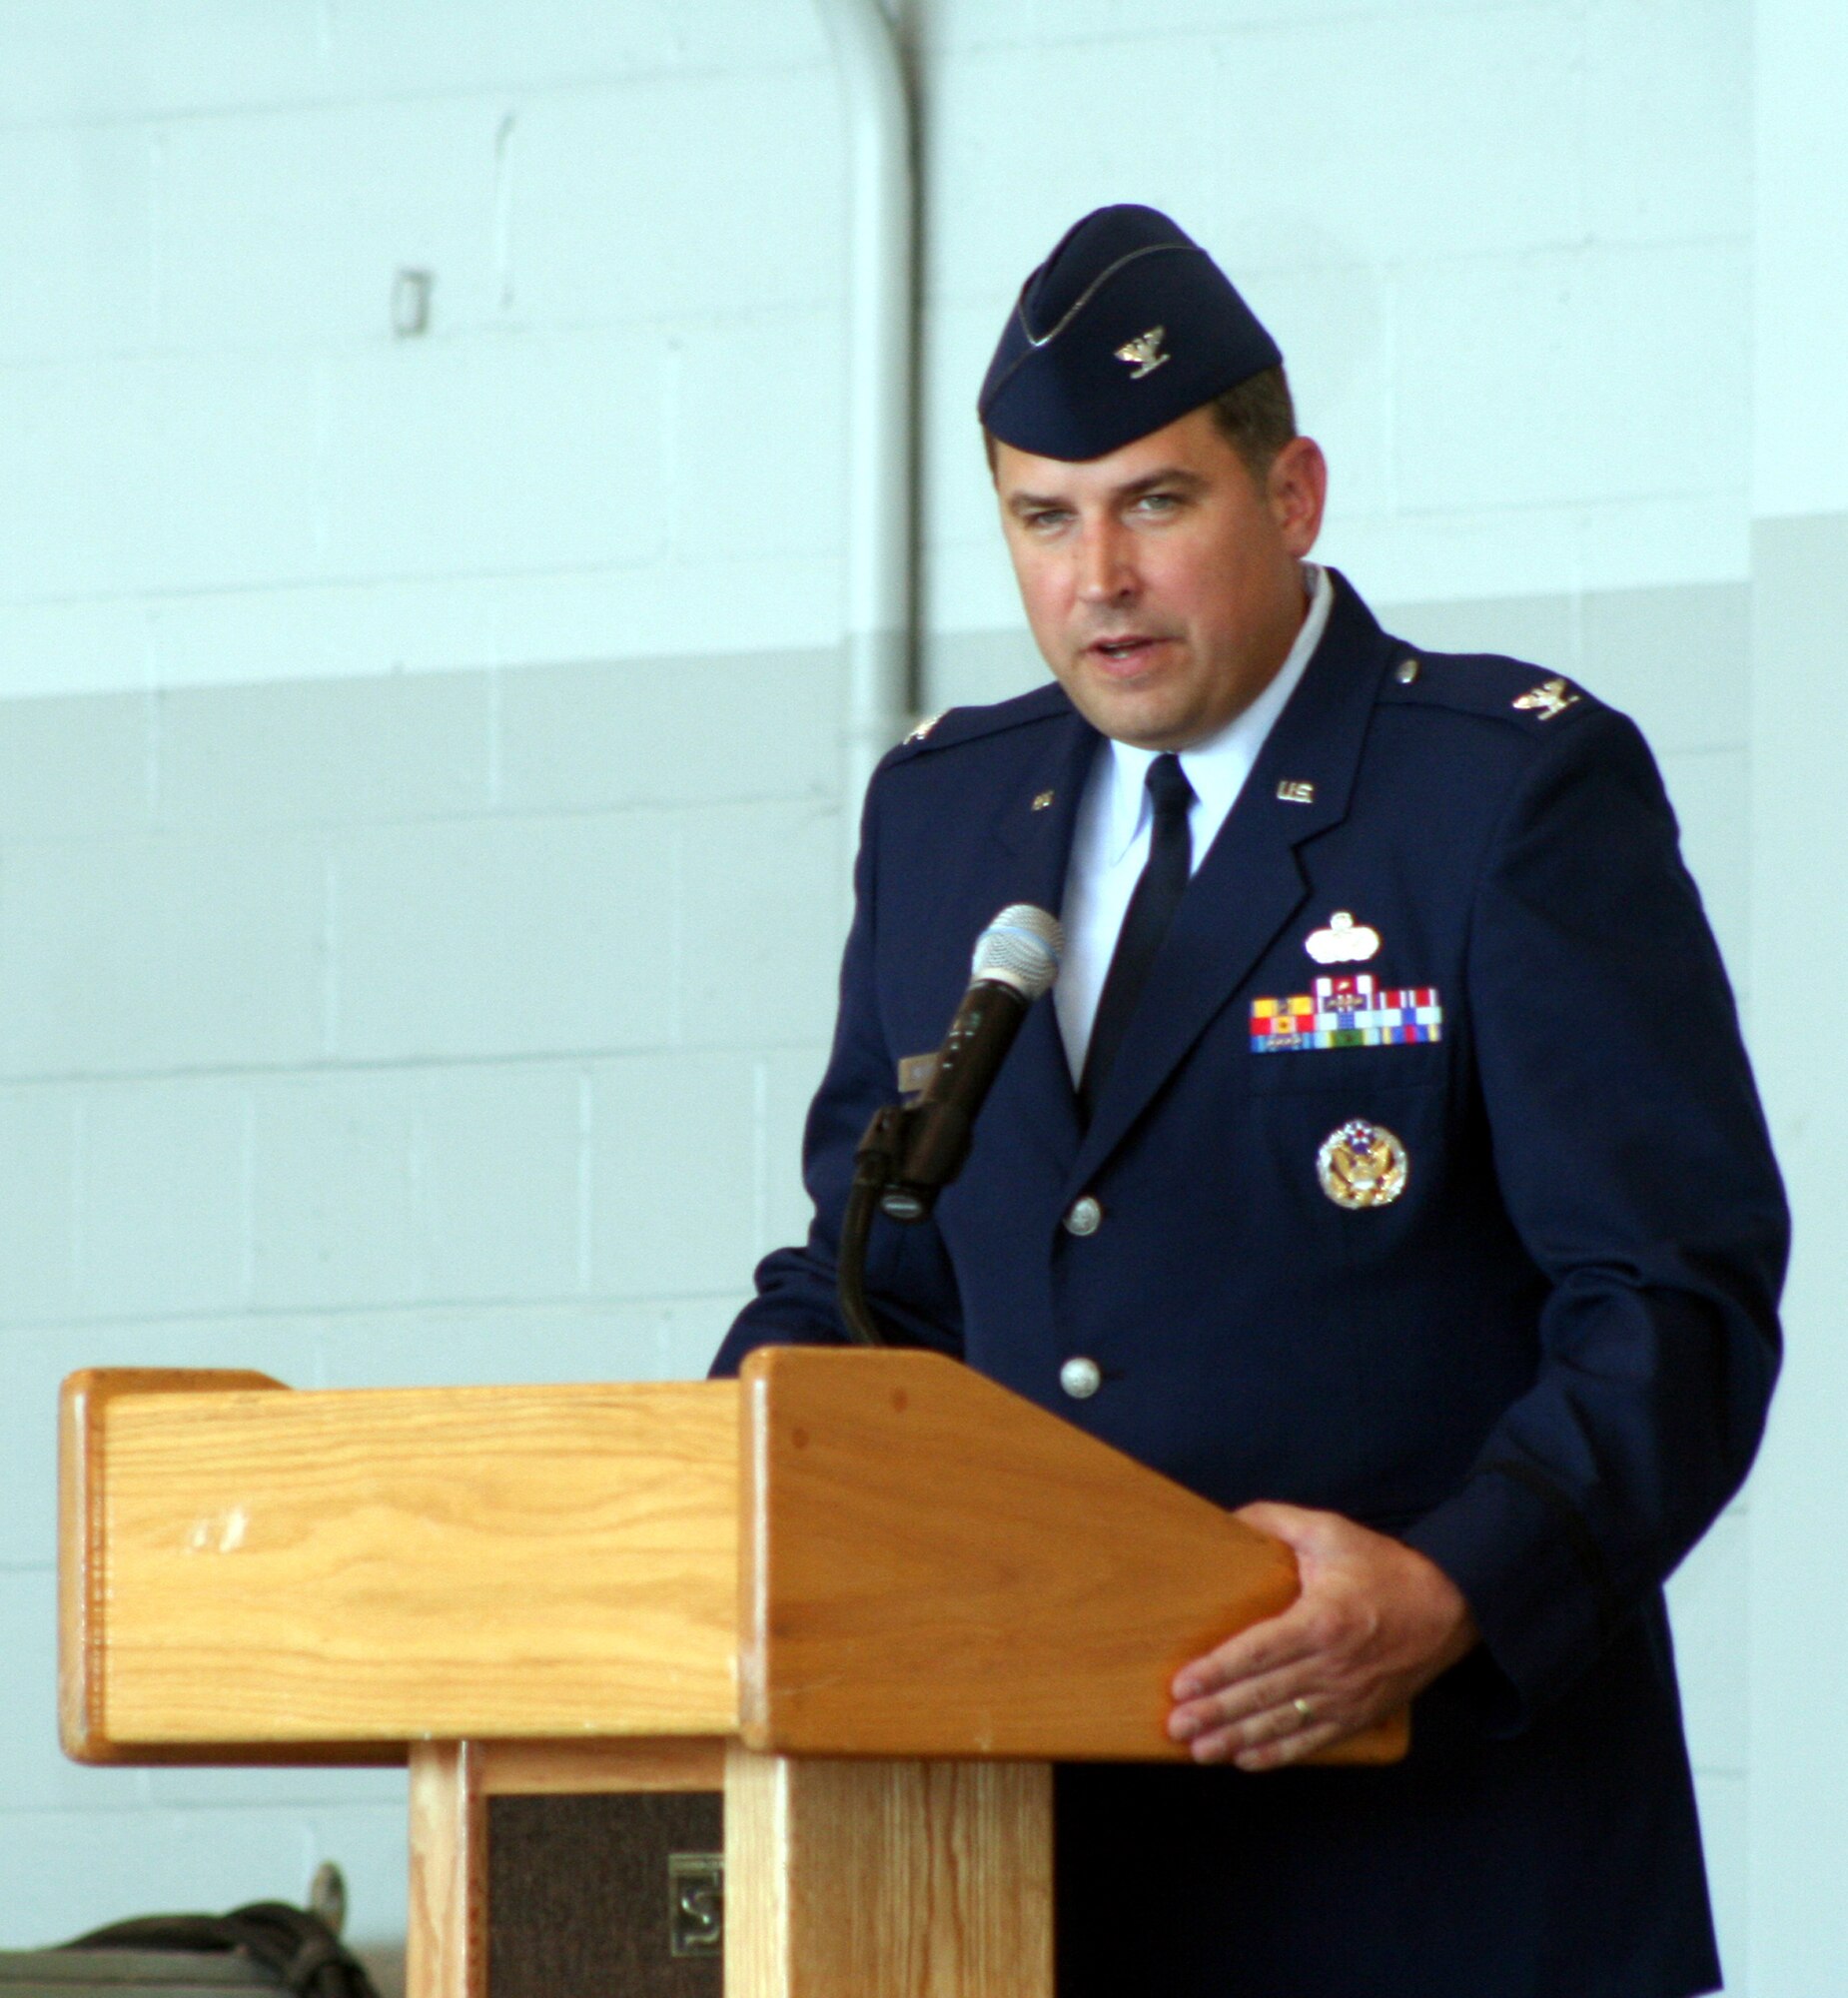 Col. Michael Smietana took command of 16th Mission Support Group change of command July 14.